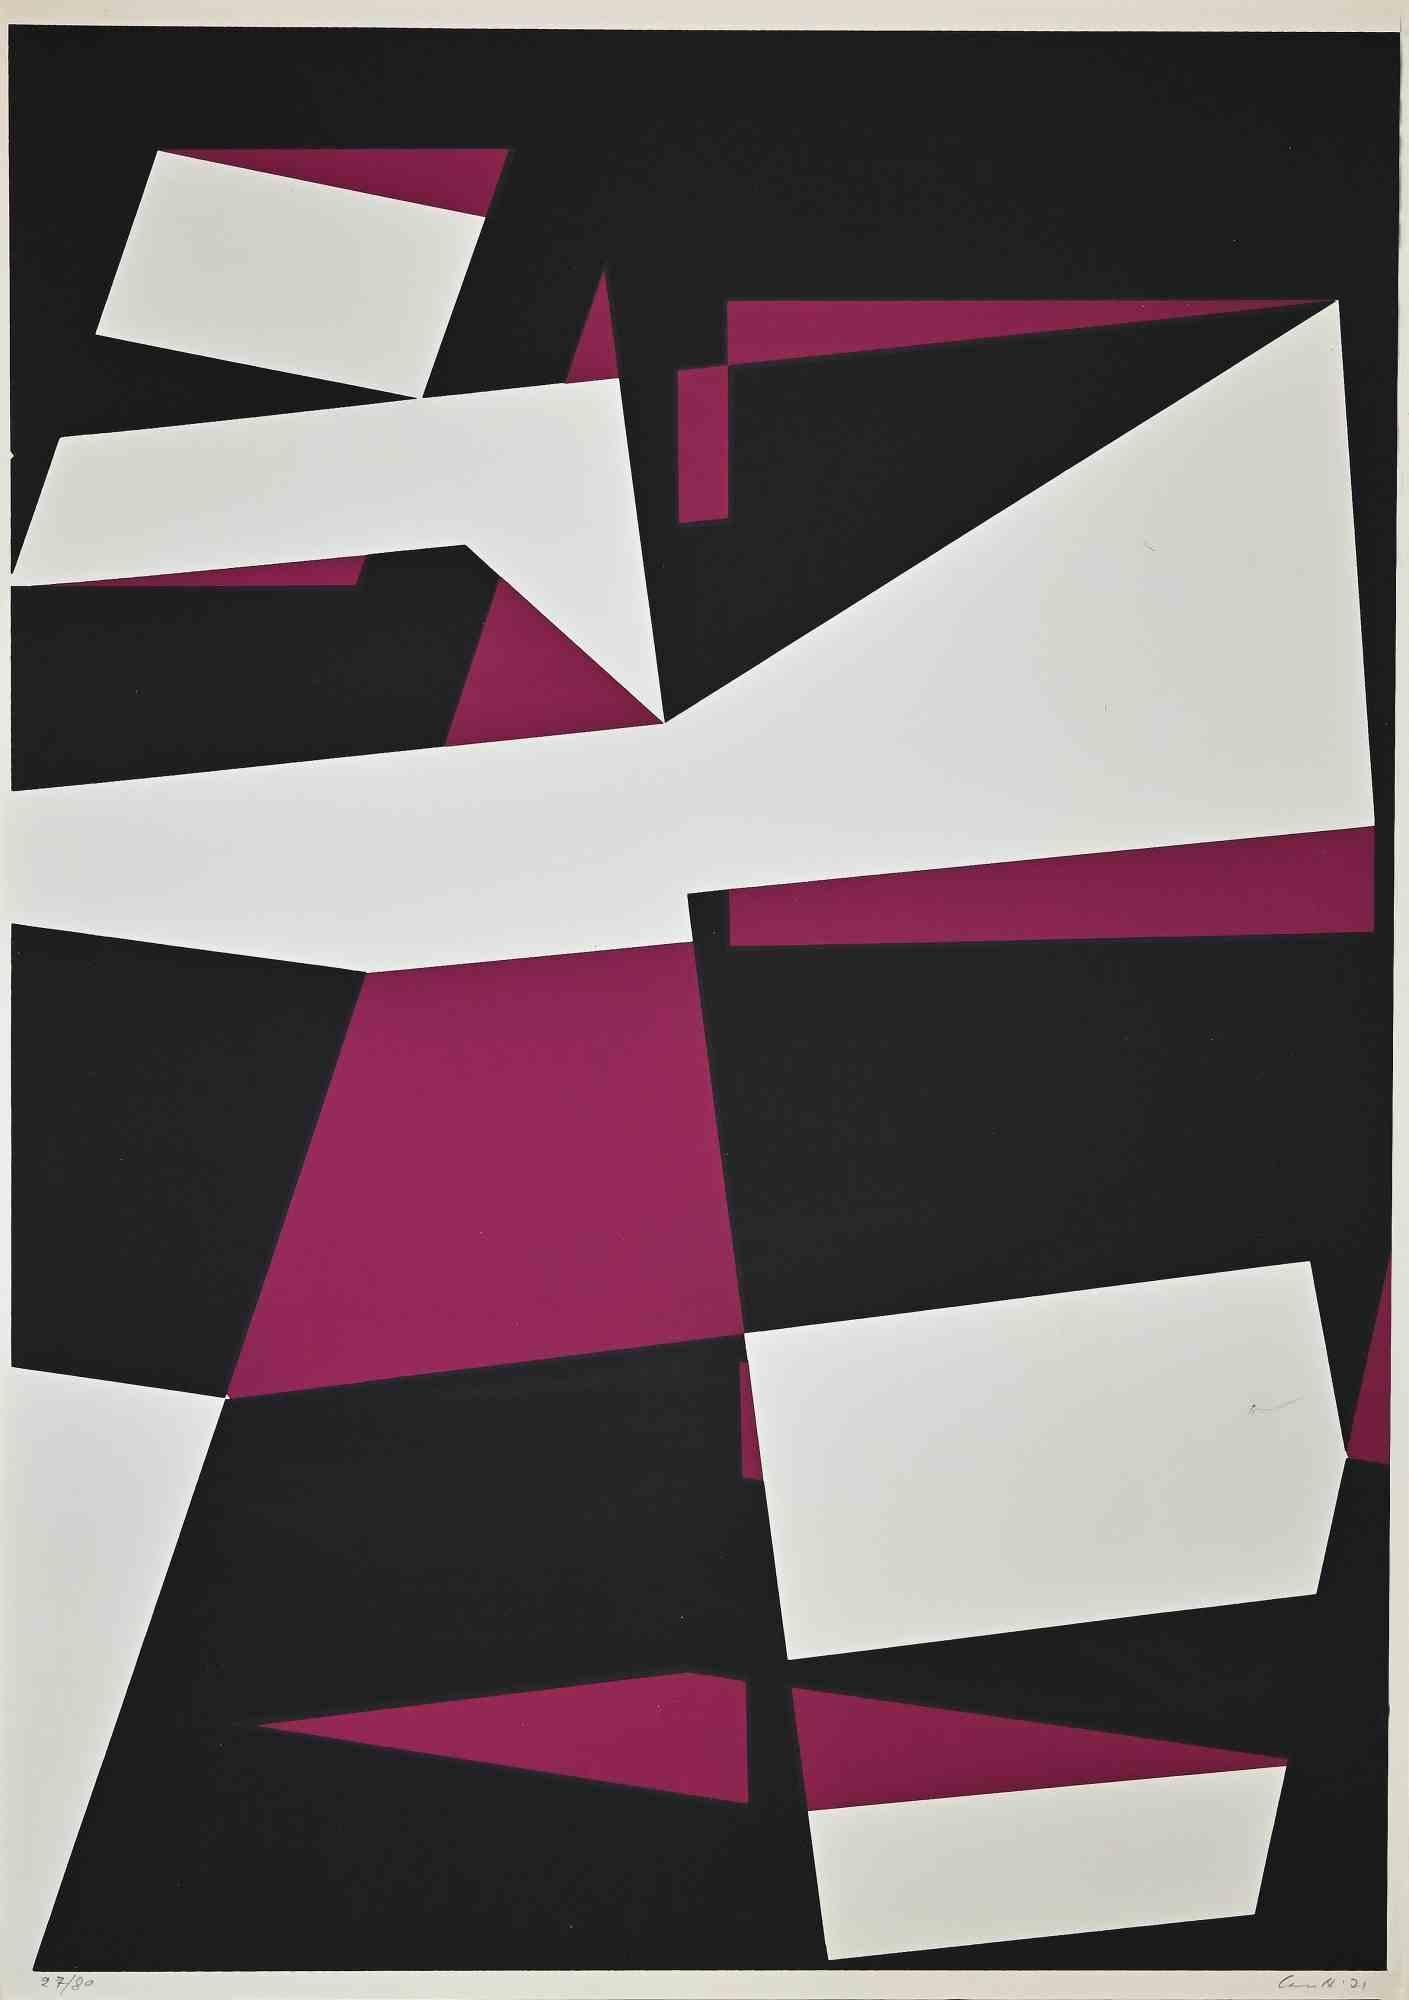  Violet Composition is a screen print realized by Umberto Maria Casotti in 1971.

Hand-signed and dated on the lower right.  Numbered on the lower left. Edition of 27/80 prints

The state of preservation of the artwork is good except for some light